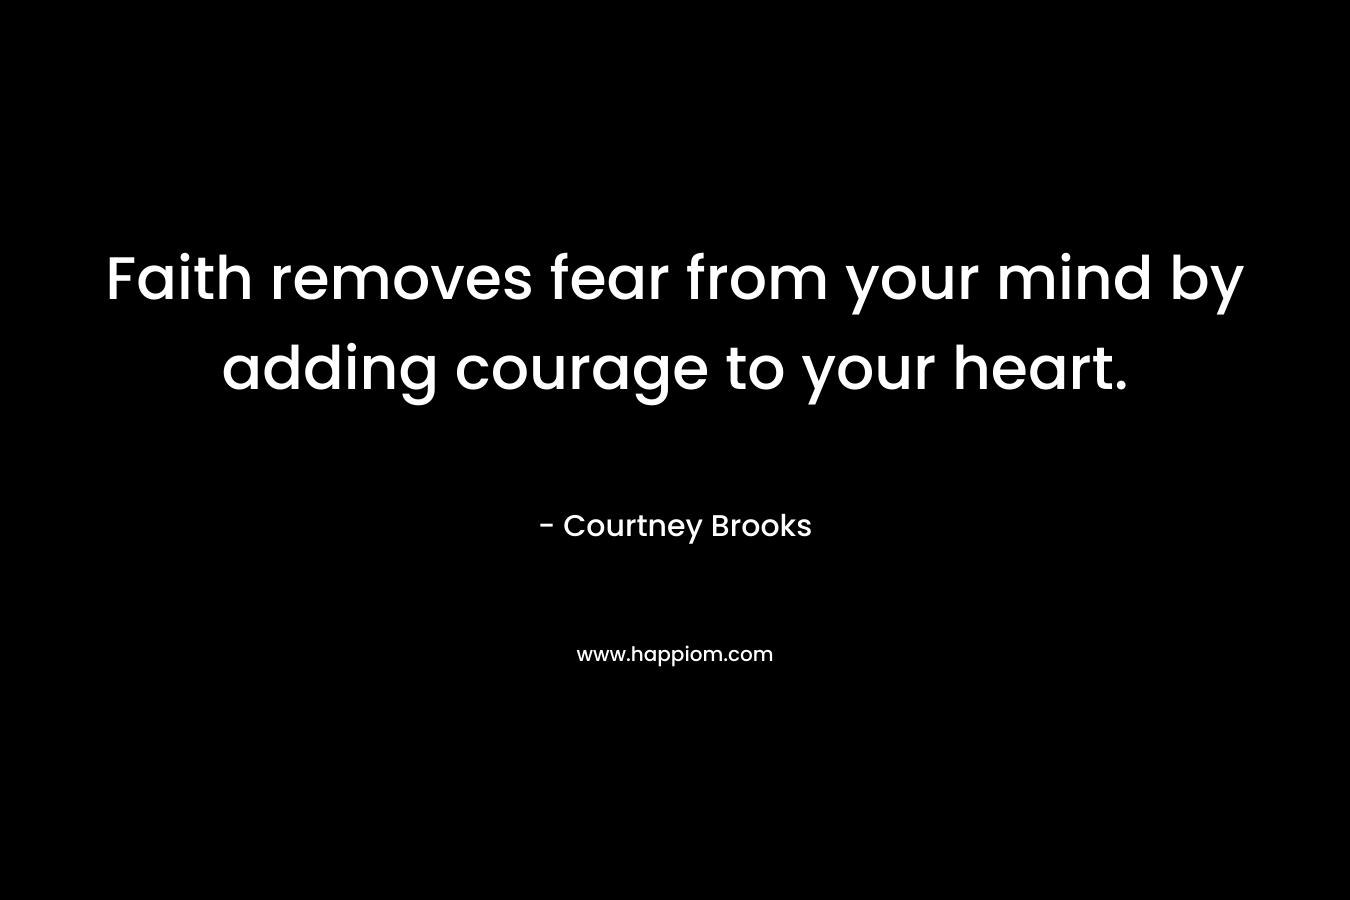 Faith removes fear from your mind by adding courage to your heart. – Courtney Brooks